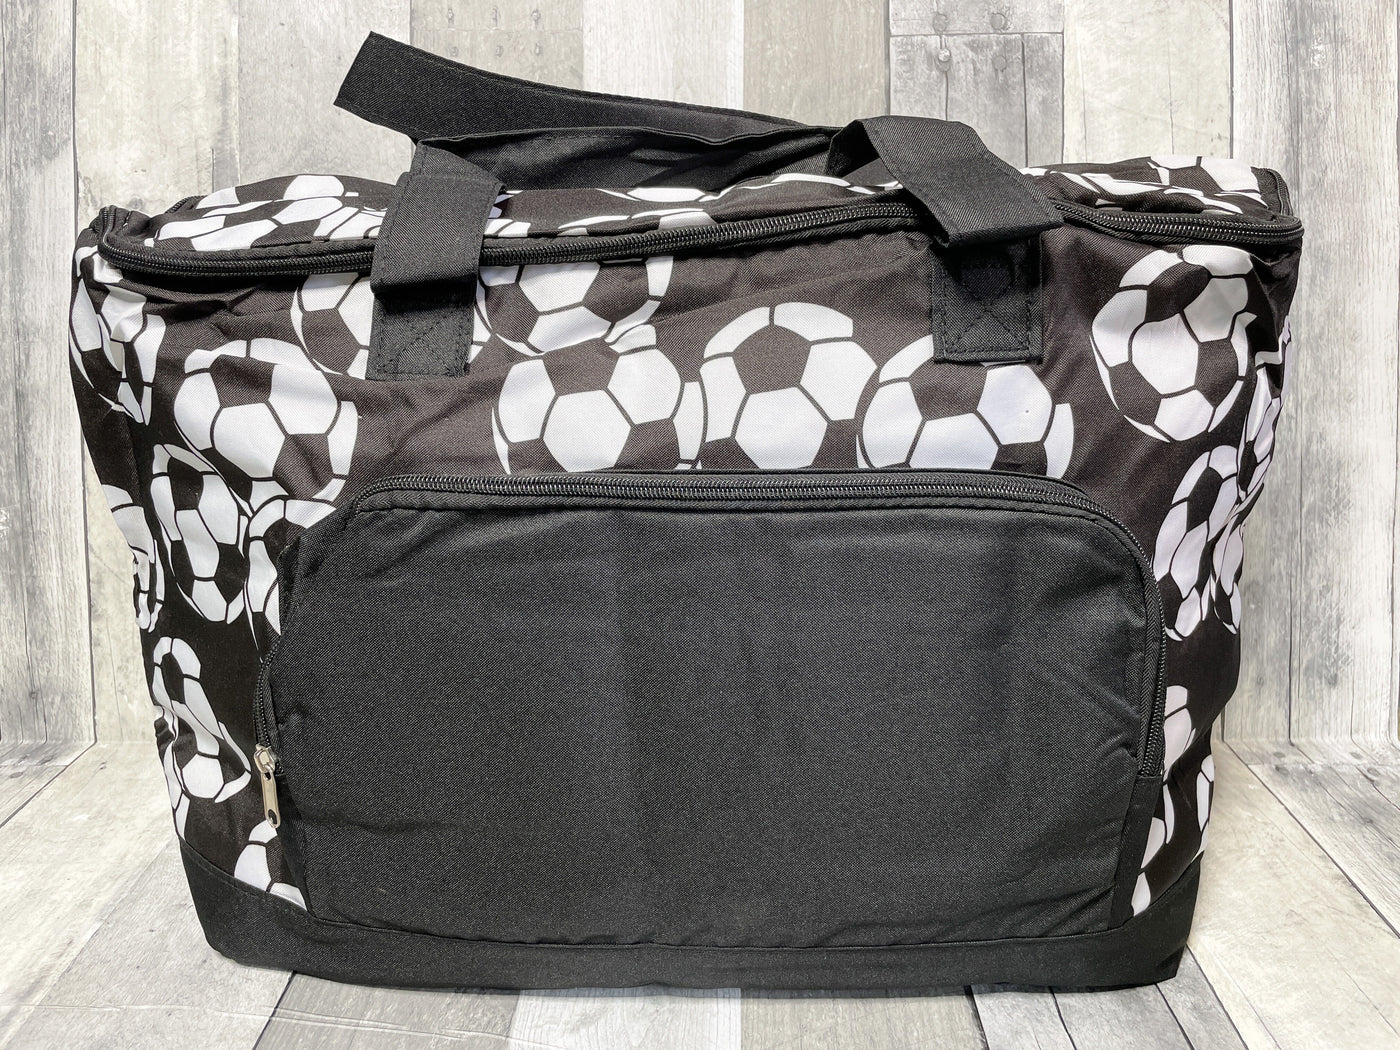 Great Catch Insulated Cooler Bag insulated The Teal Bandit Soccer 